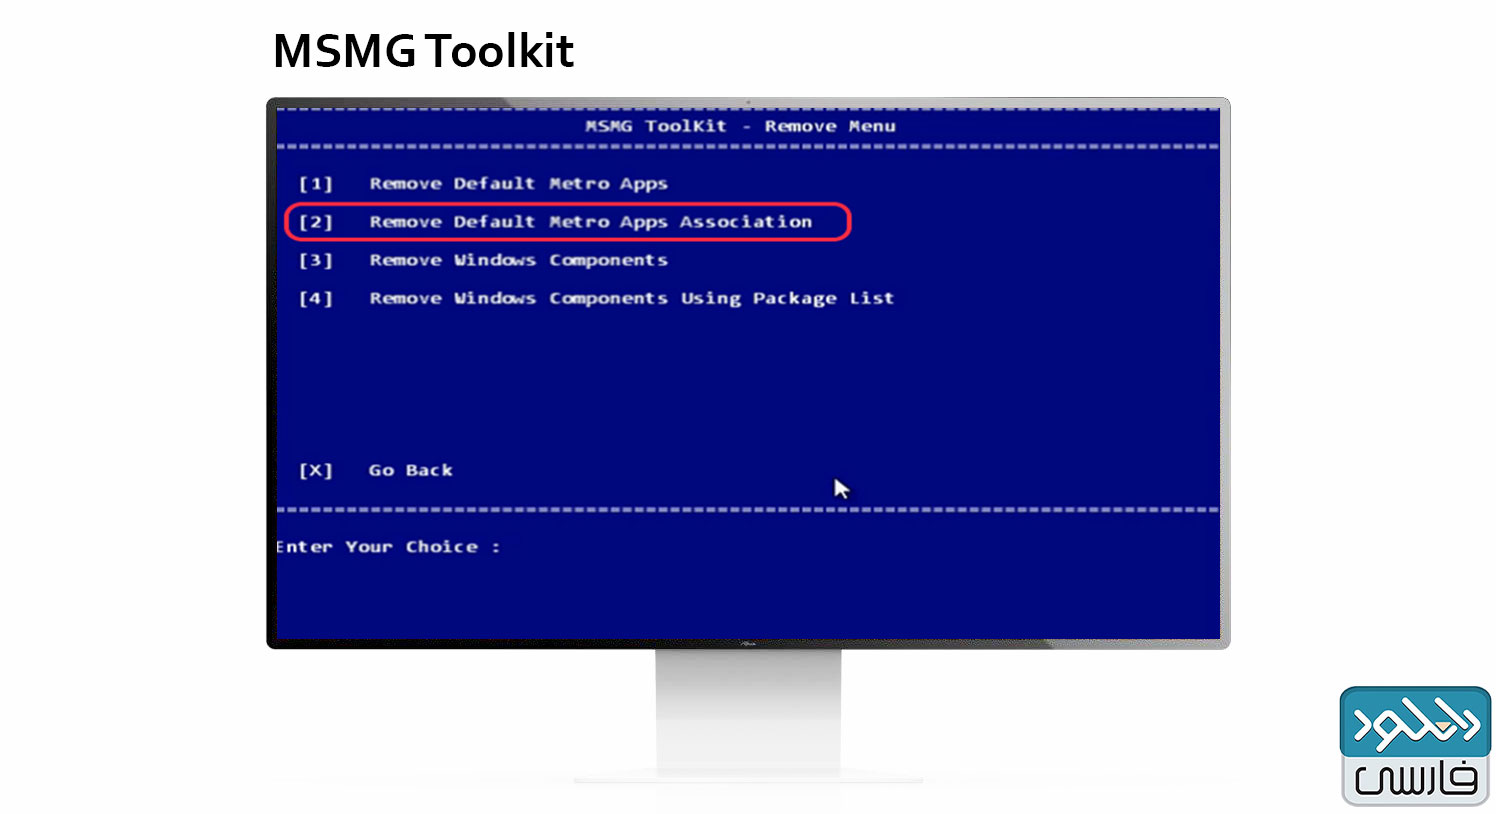 msmg toolkit imageinfo.txt missing